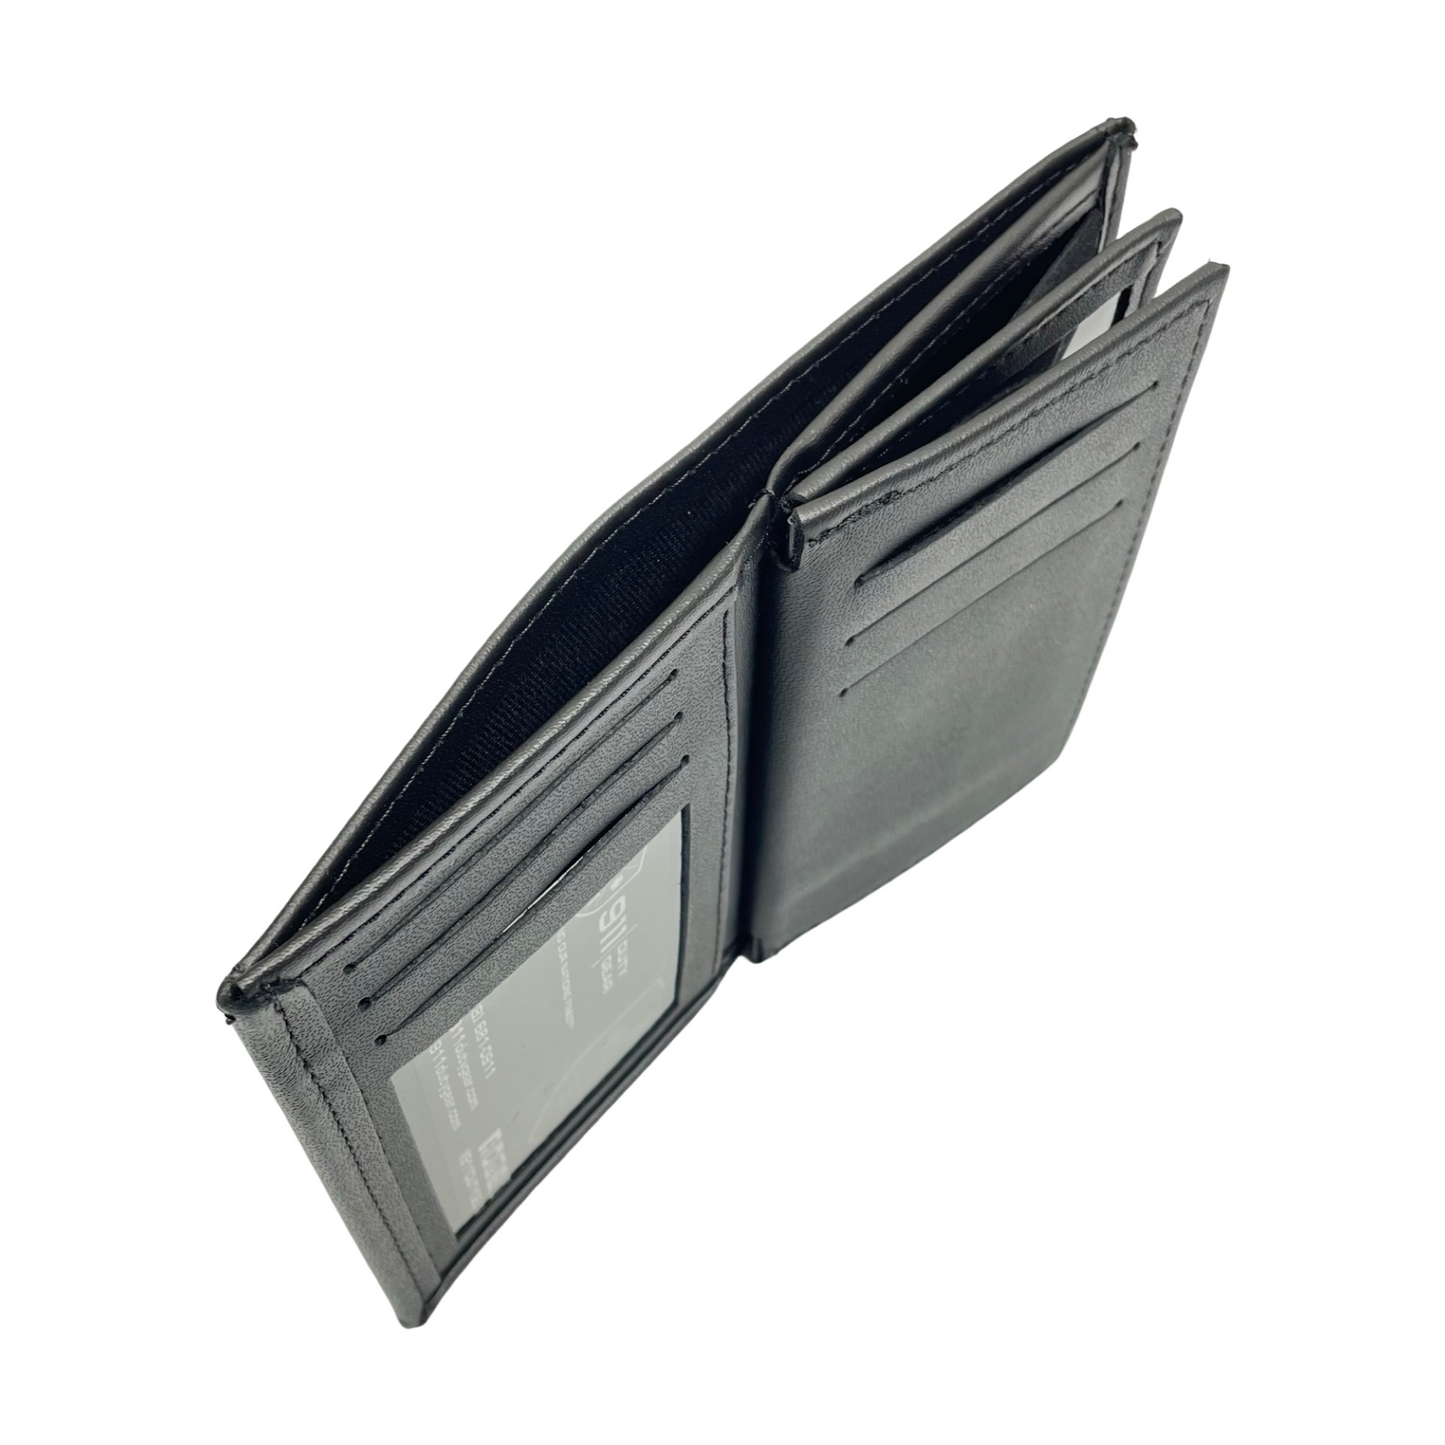 U.S. Federal Courts Horizontal Bifold Double ID Credential & Hidden Badge Wallet-Perfect Fit-911 Duty Gear USA